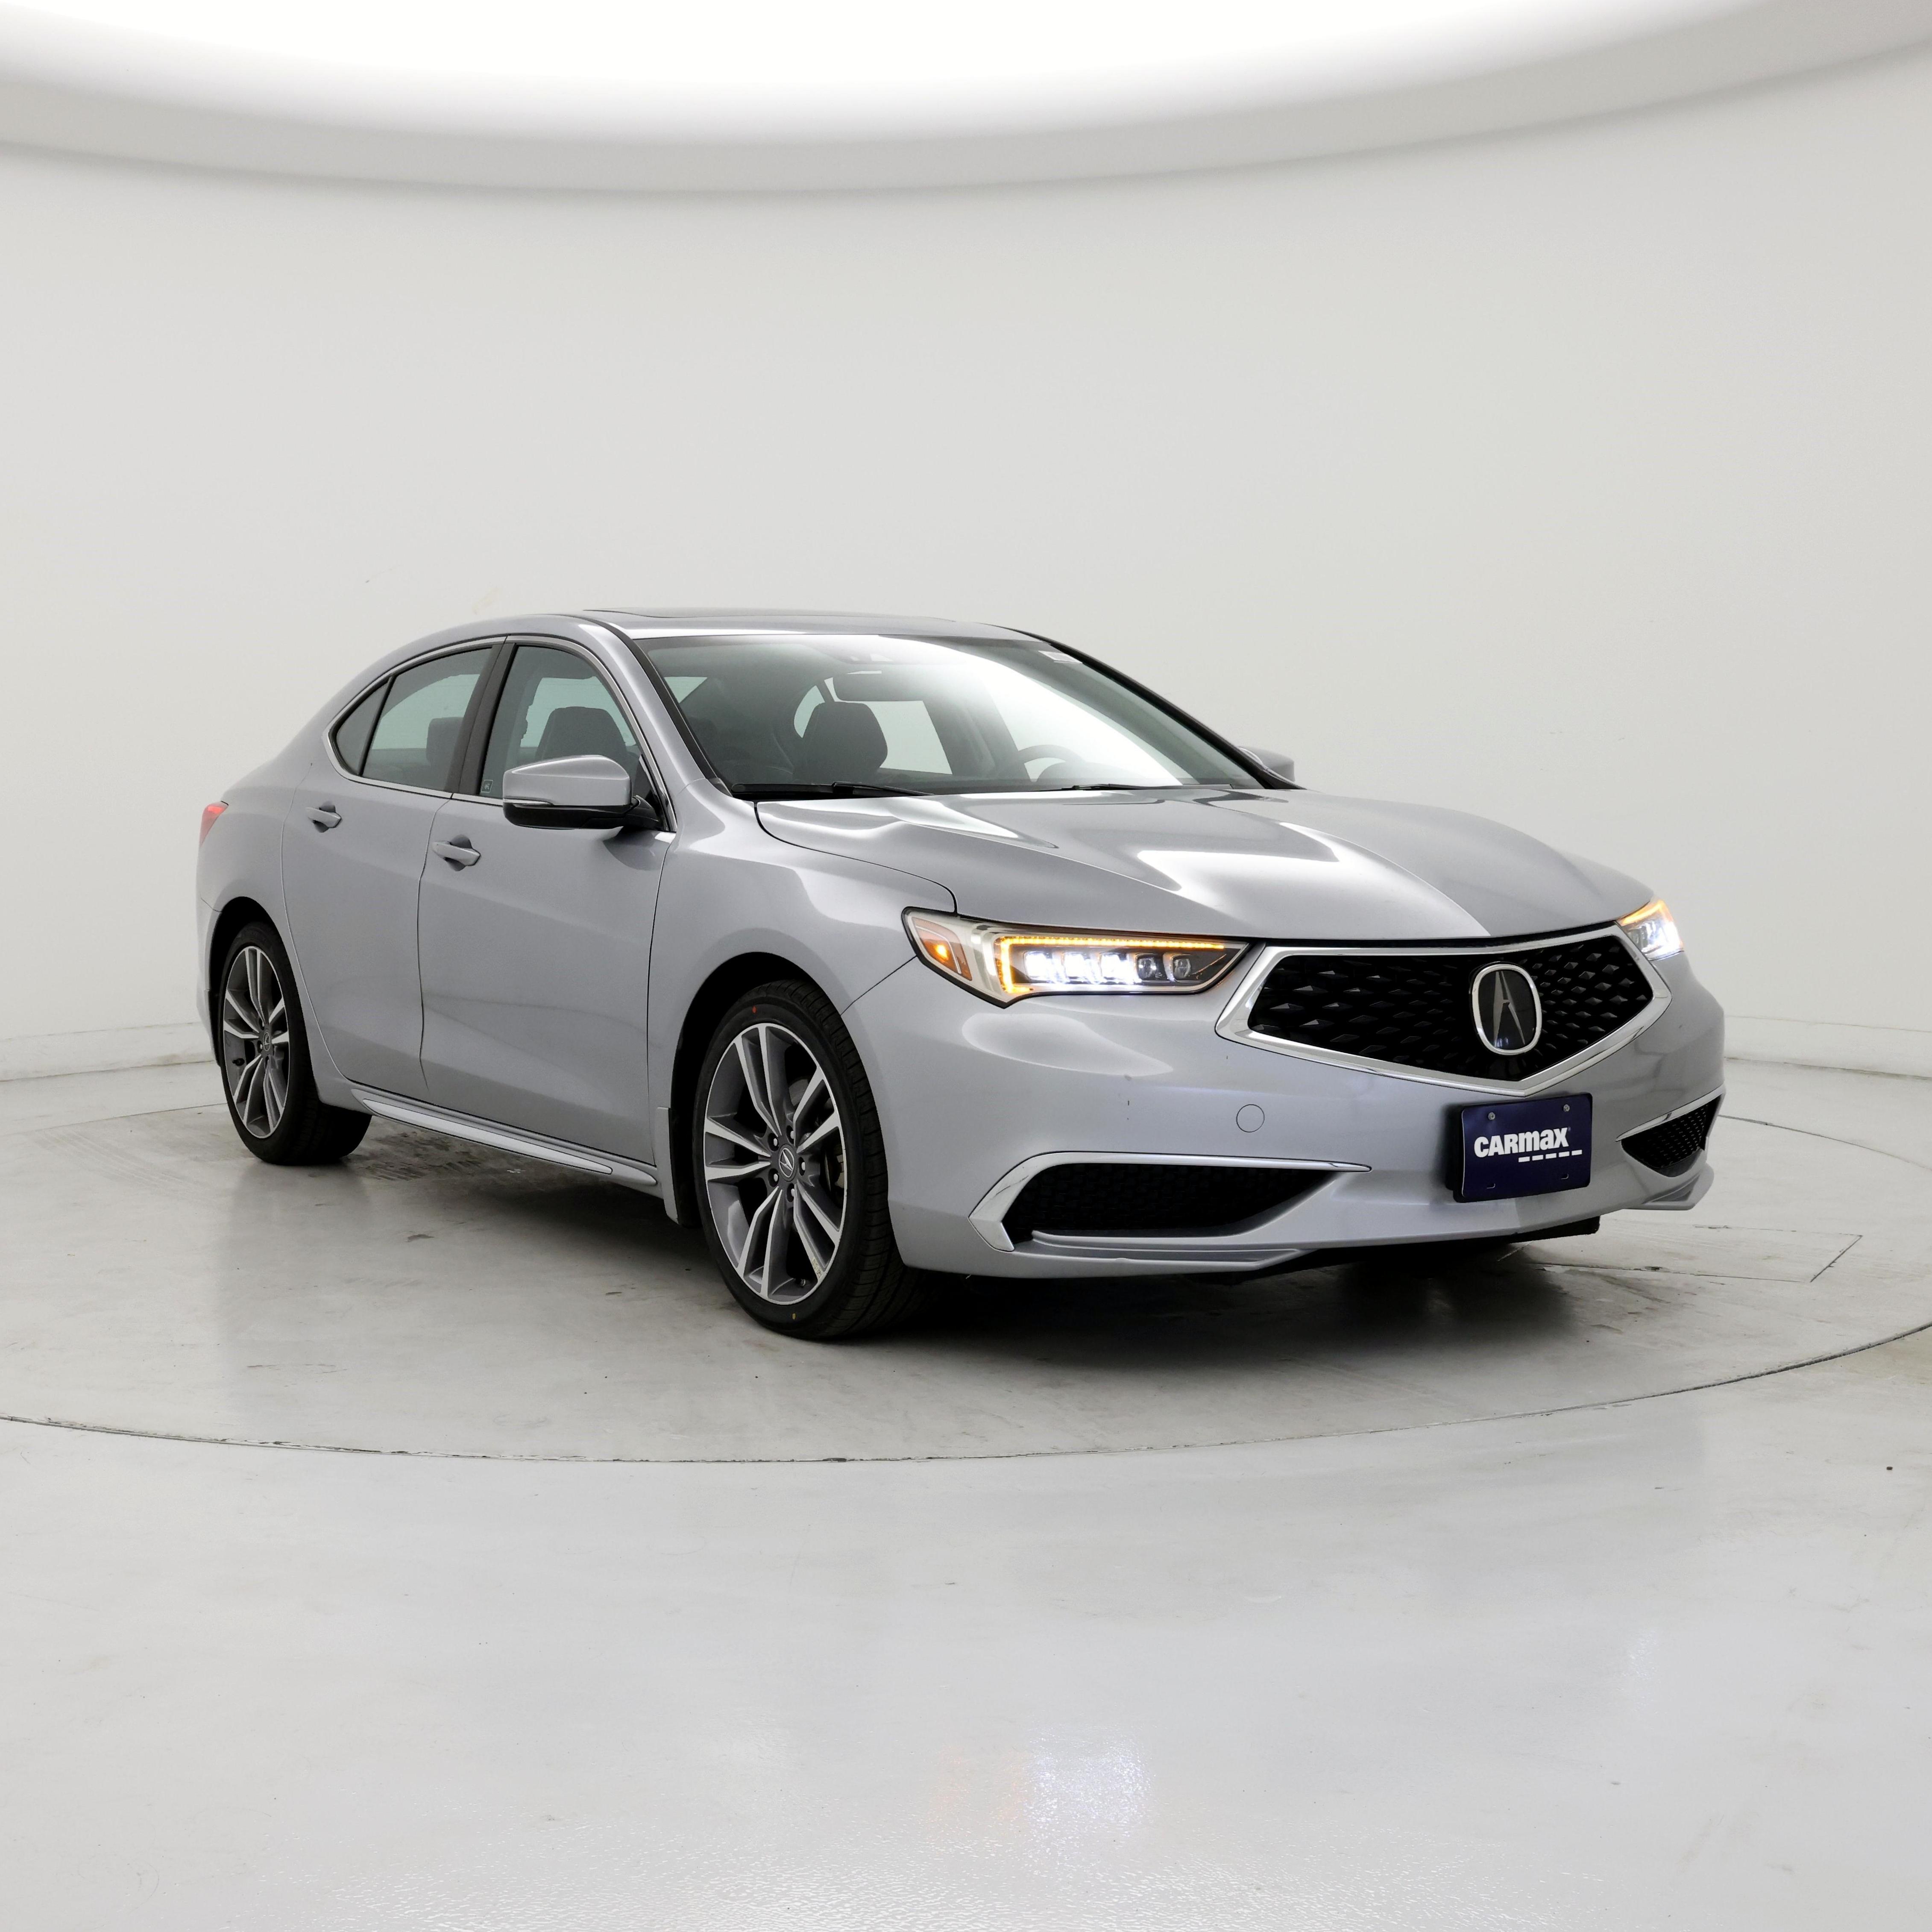 2020 Acura TLX V6 FWD with Technology Package